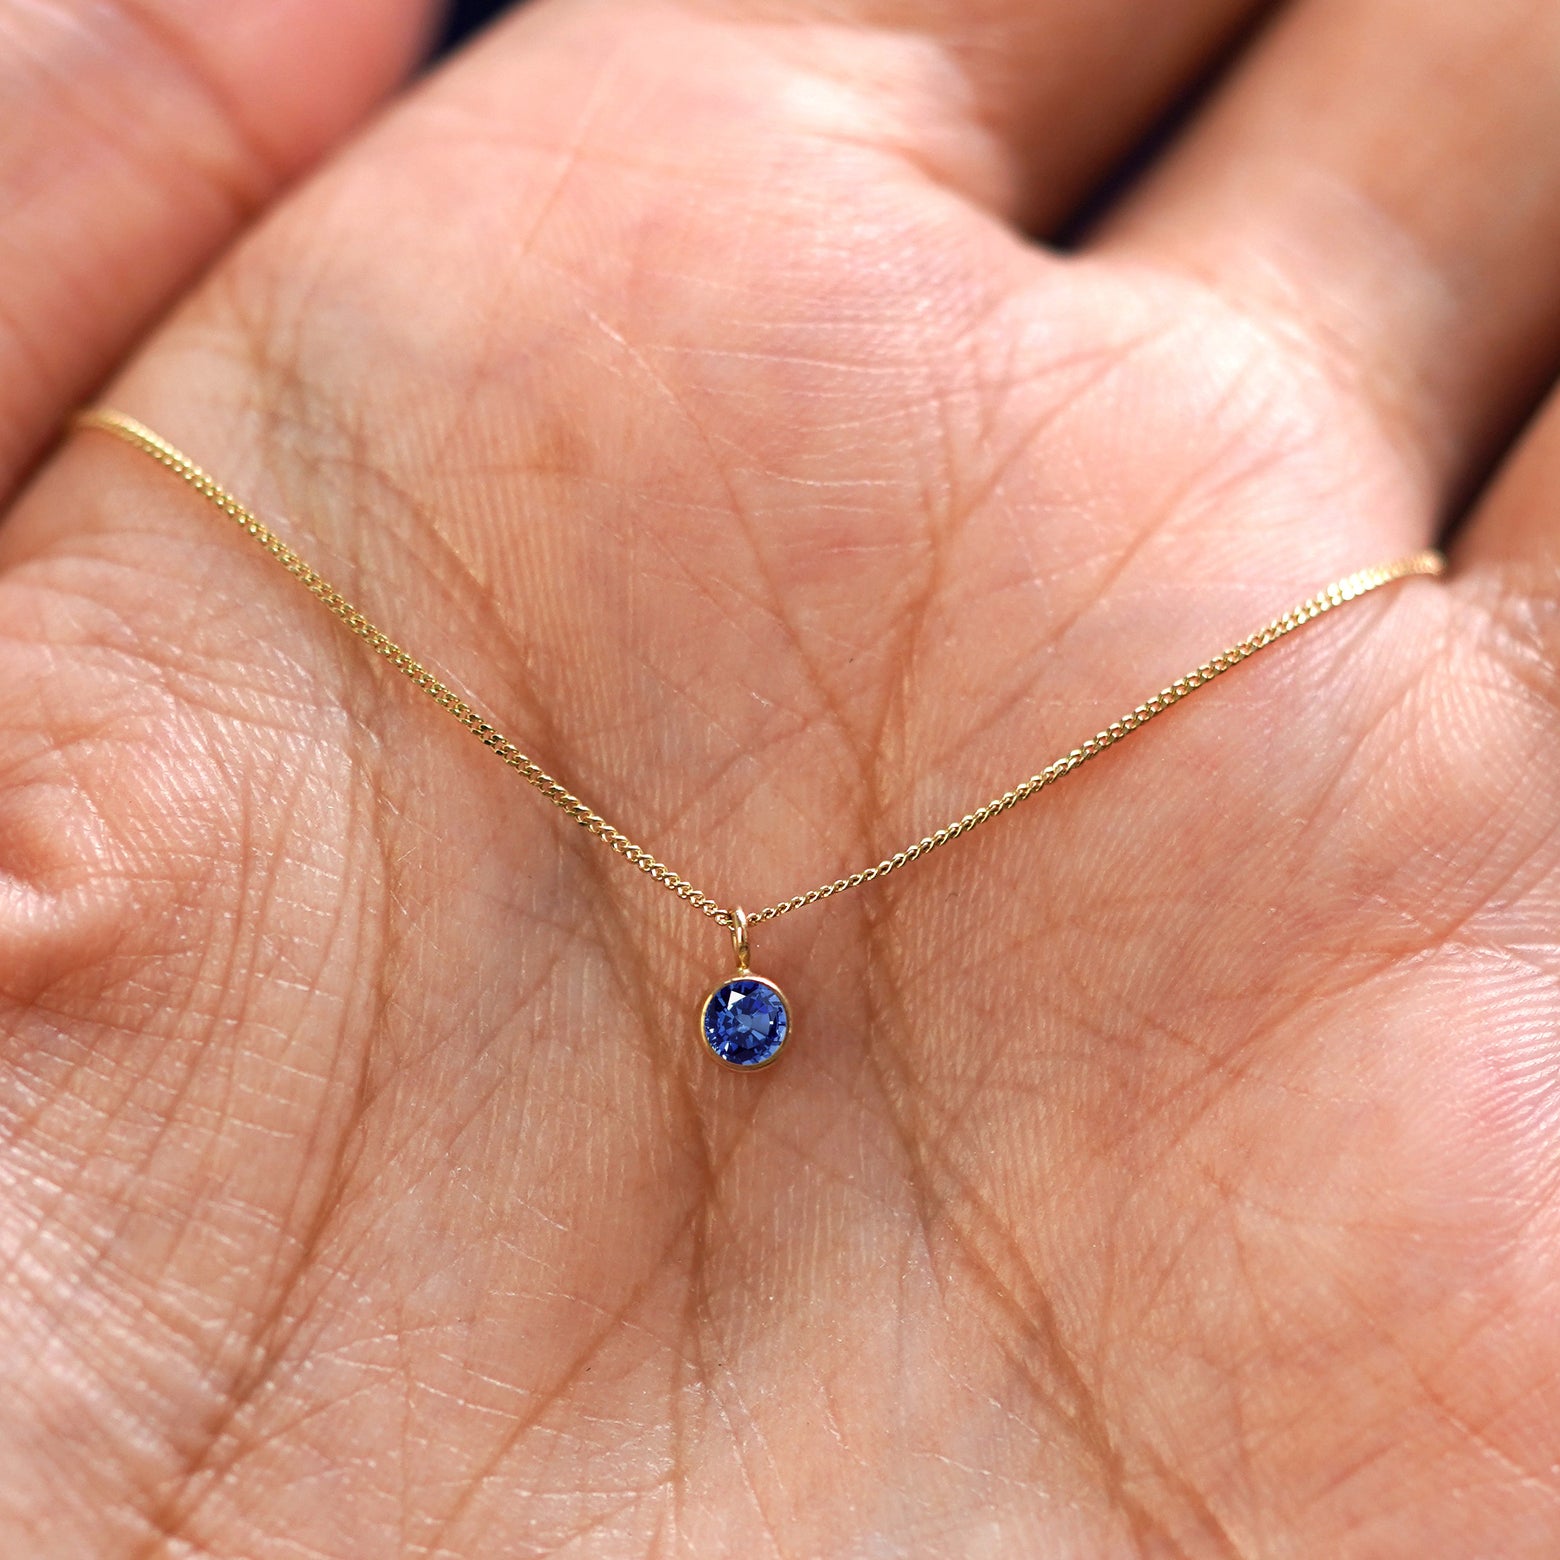 A solid 14k gold Sapphire Necklace resting in a models palm